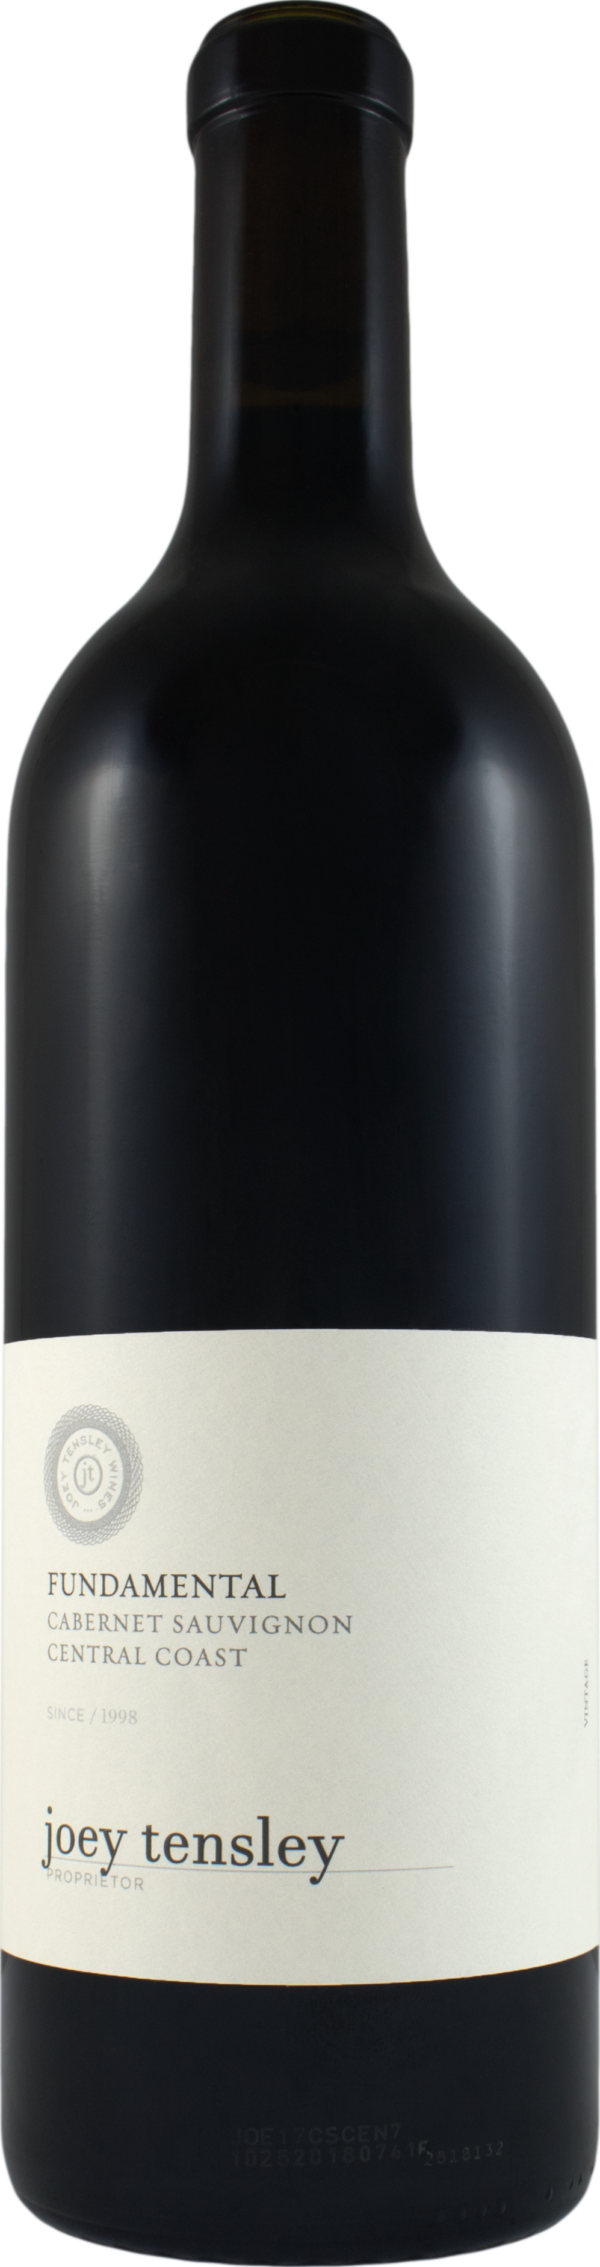 Product image of Tensley Fundamental Cabernet Sauvignon 2020 from 8wines